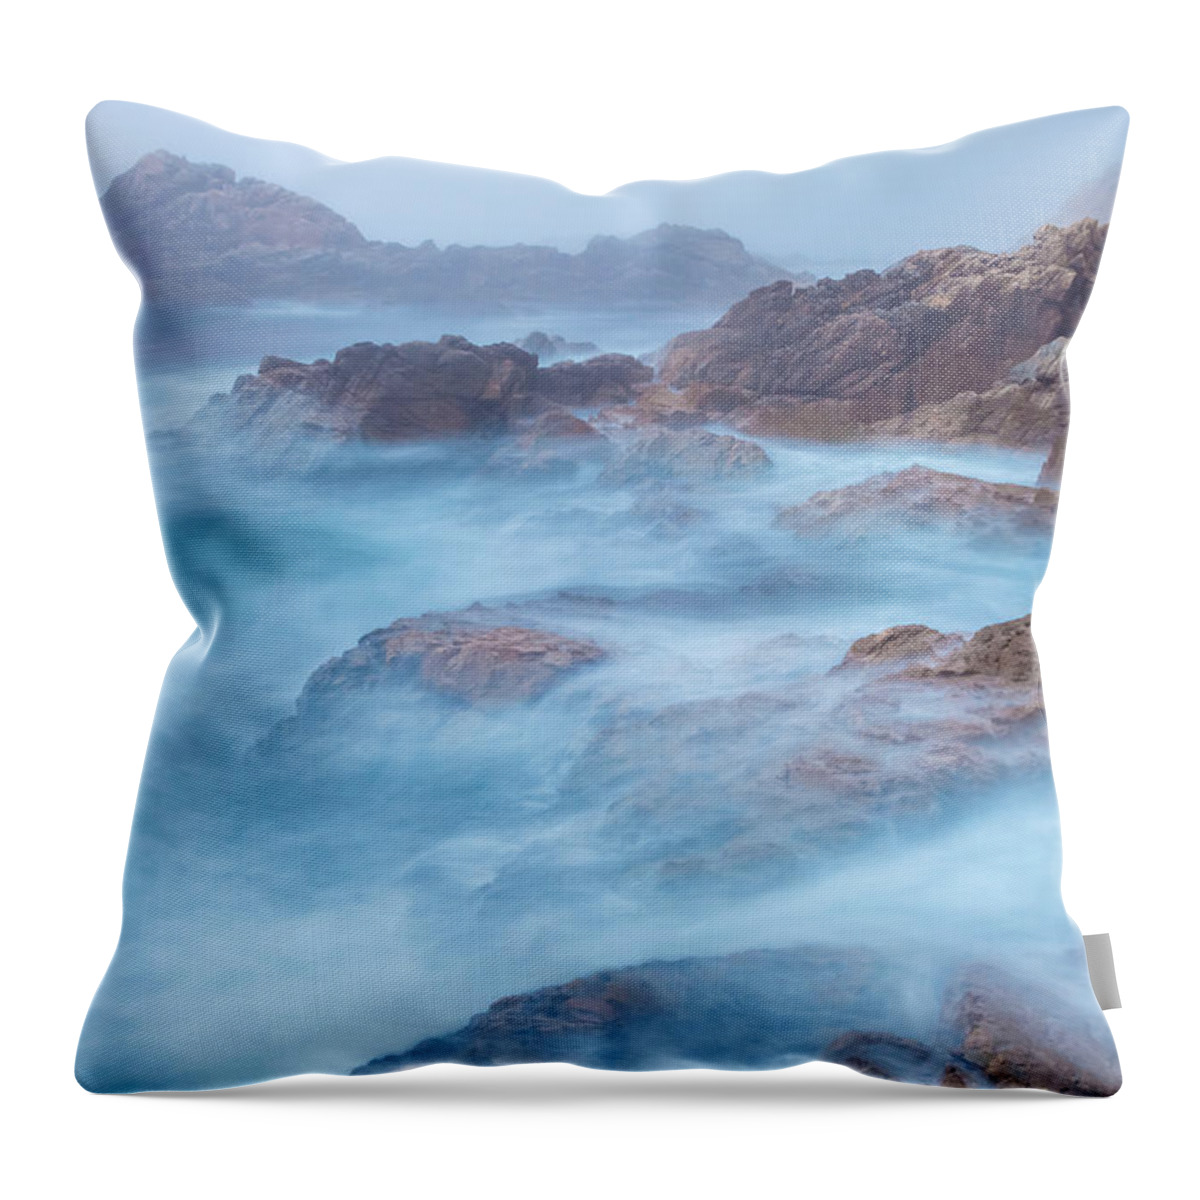 American Landscapes Throw Pillow featuring the photograph Furious Sea by Jonathan Nguyen